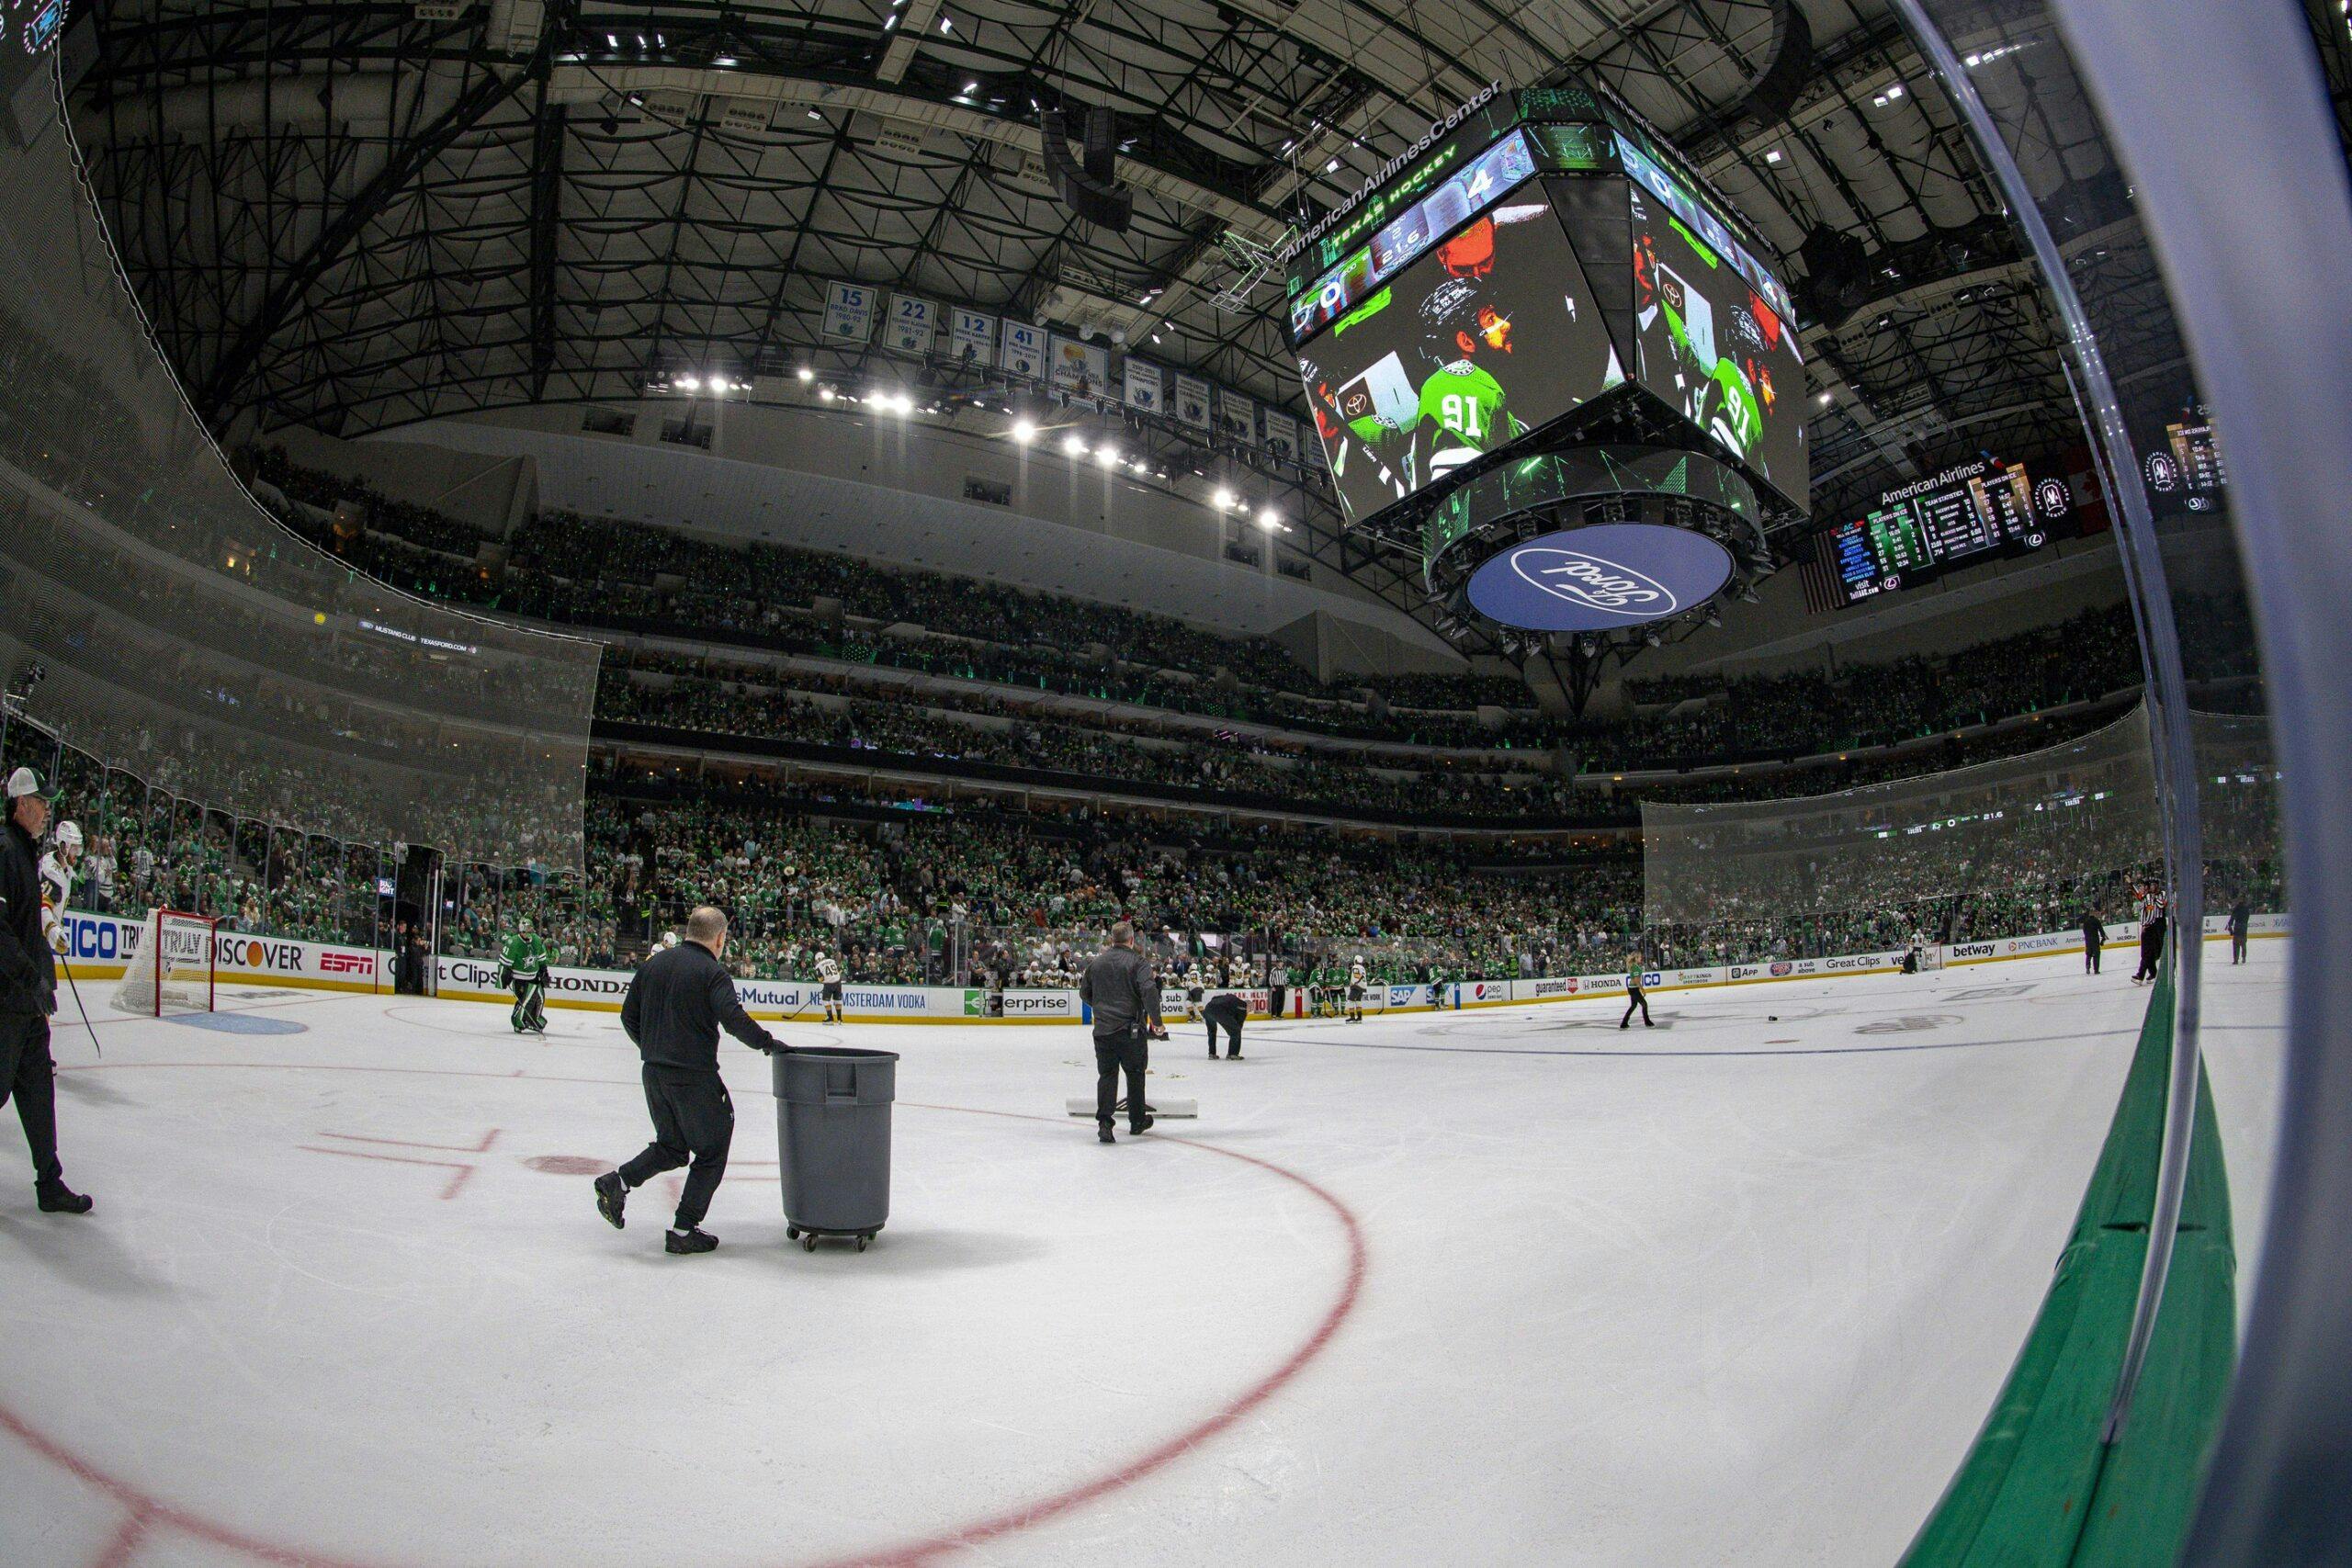 Dallas Stars CEO issues statement after fans litter ice with debris in Game 3